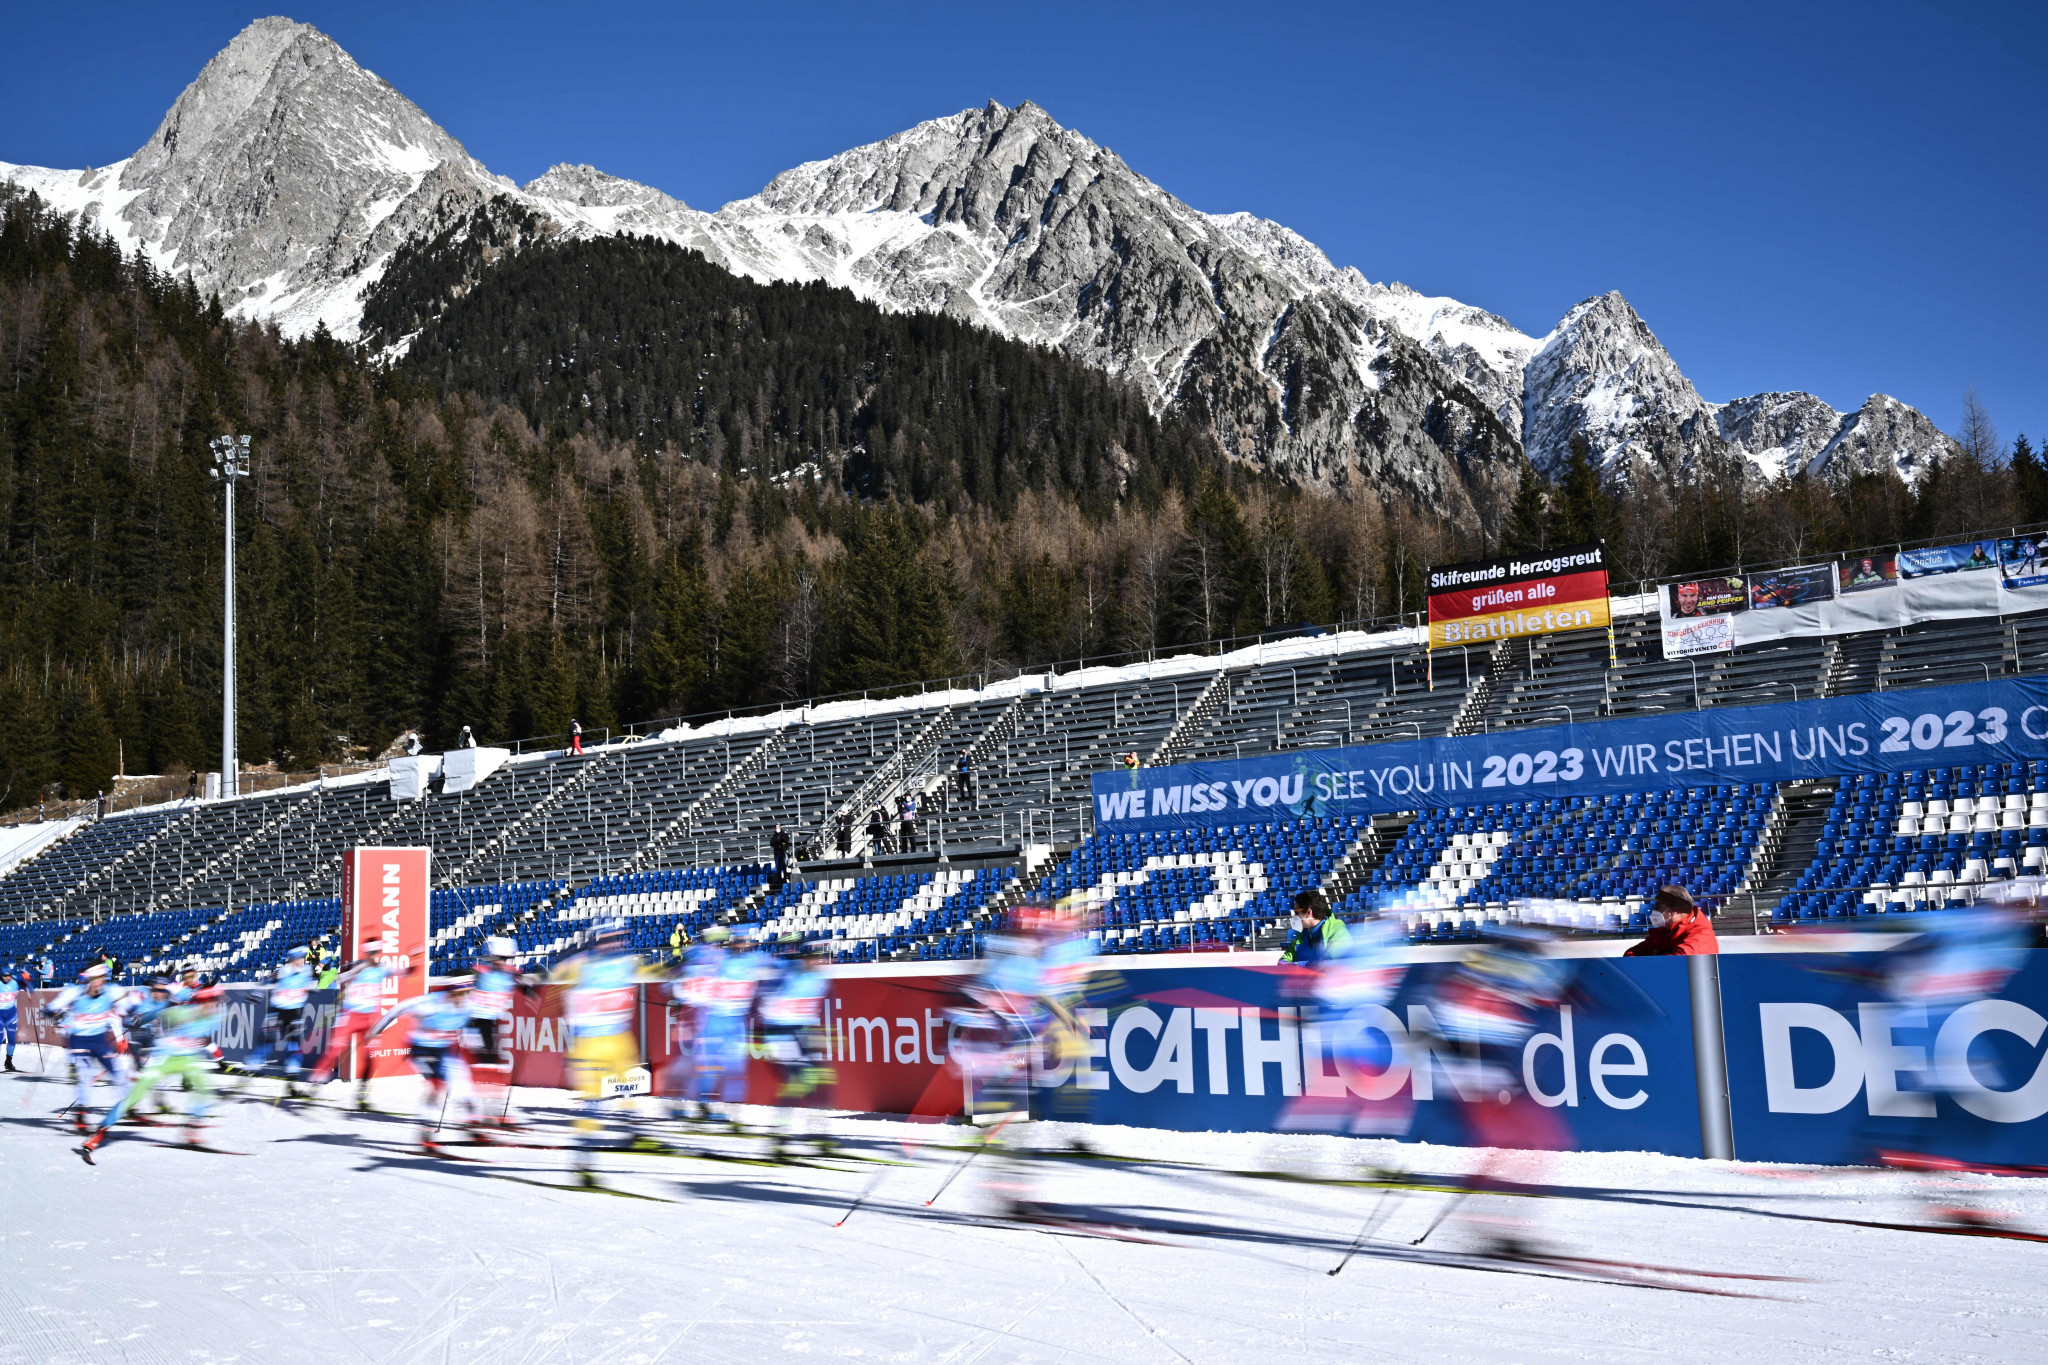 Work on Milan Cortina 2026 biathlon venue paused with call for tenders to be relaunched